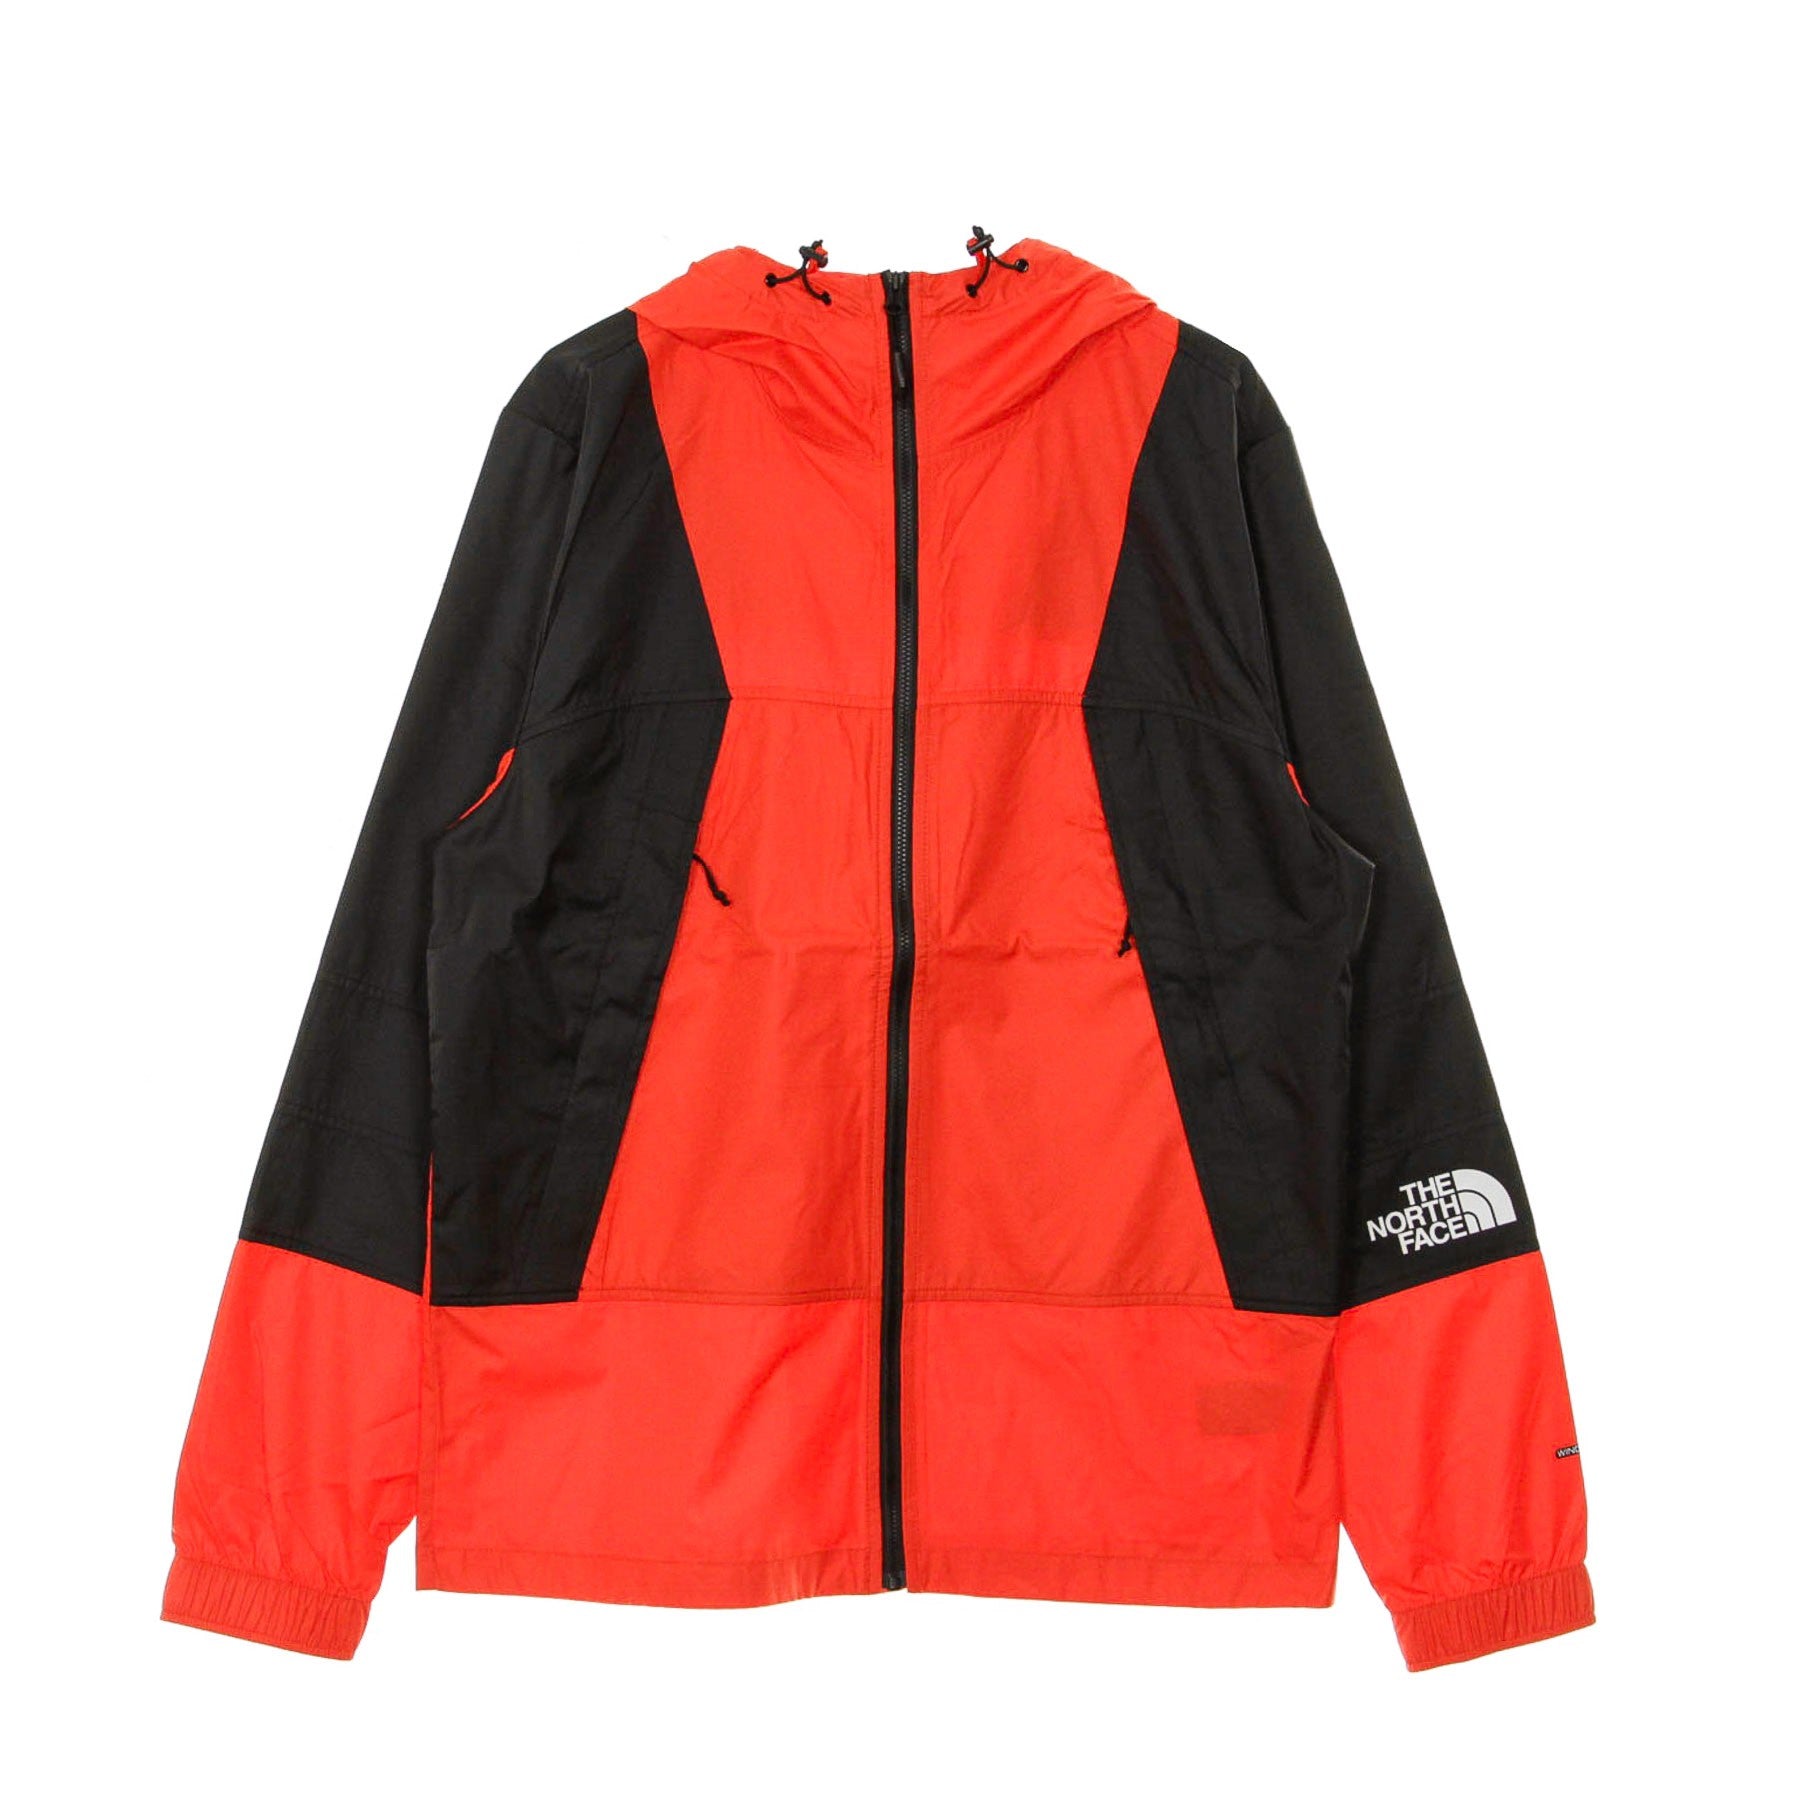 The North Face, Giacca A Vento Uomo Mountain Light Windshell Jkt, Fiery Red/black